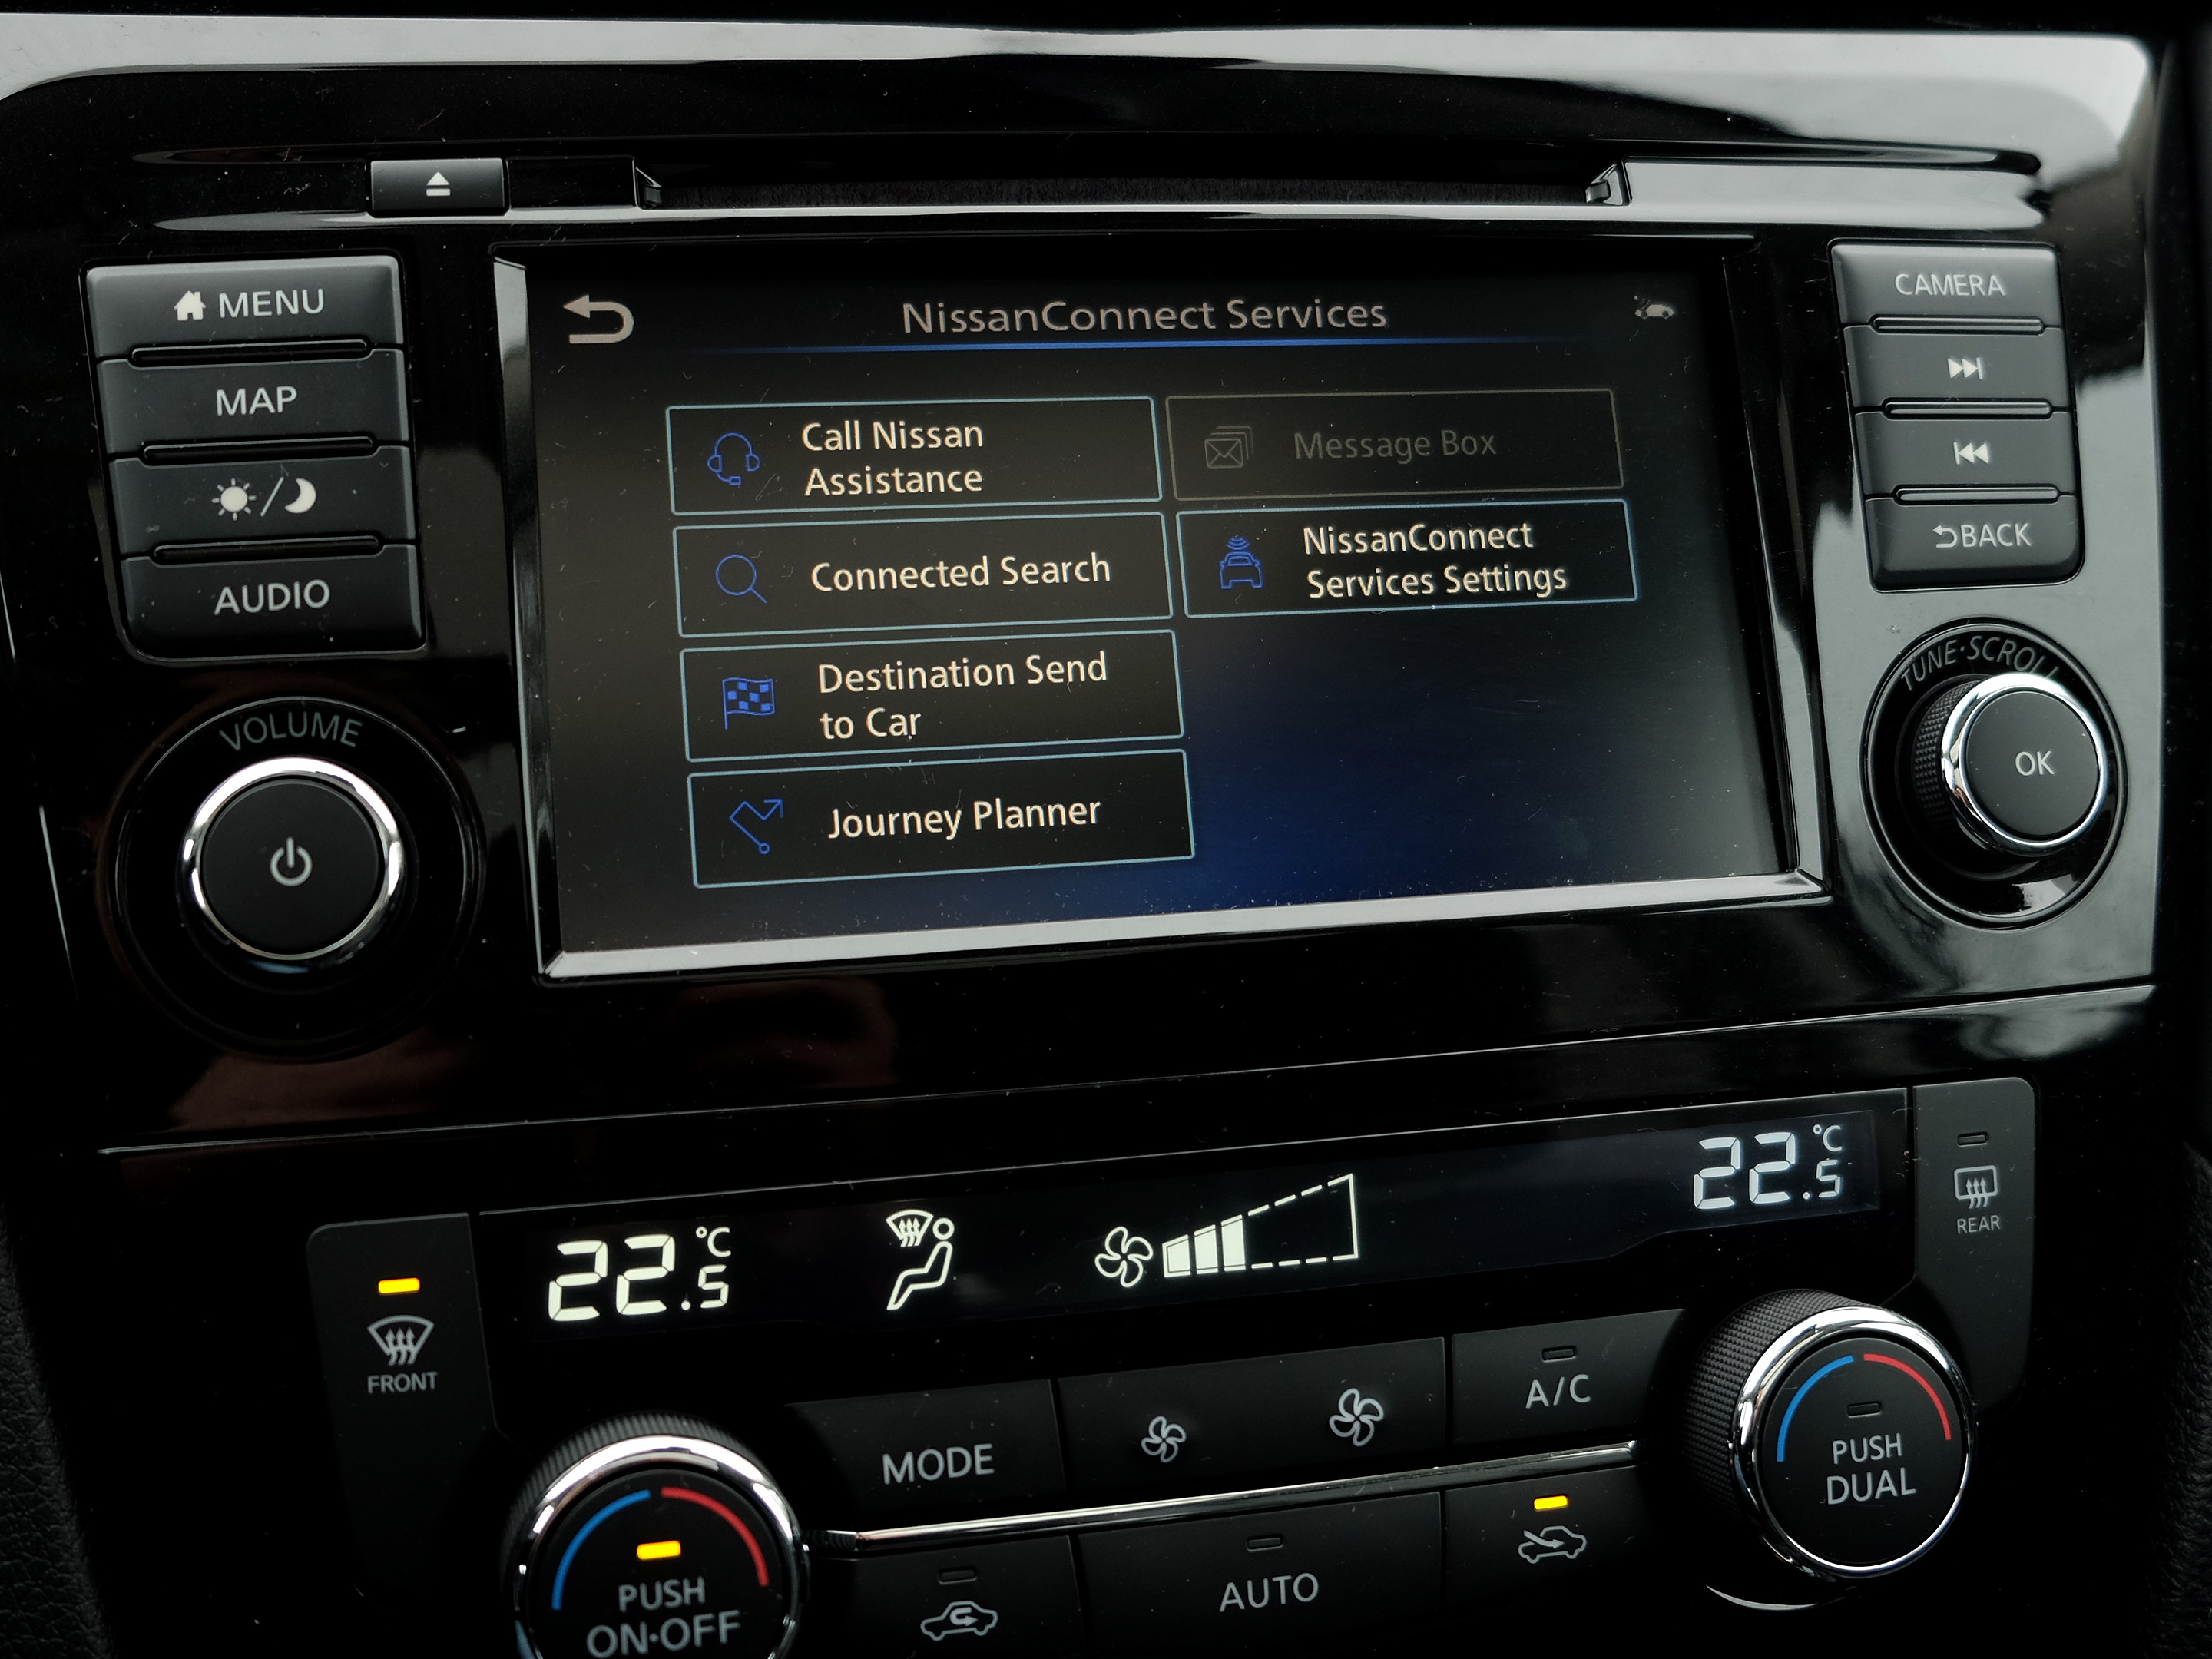 2018 NissanConnect System Review baby steps forward